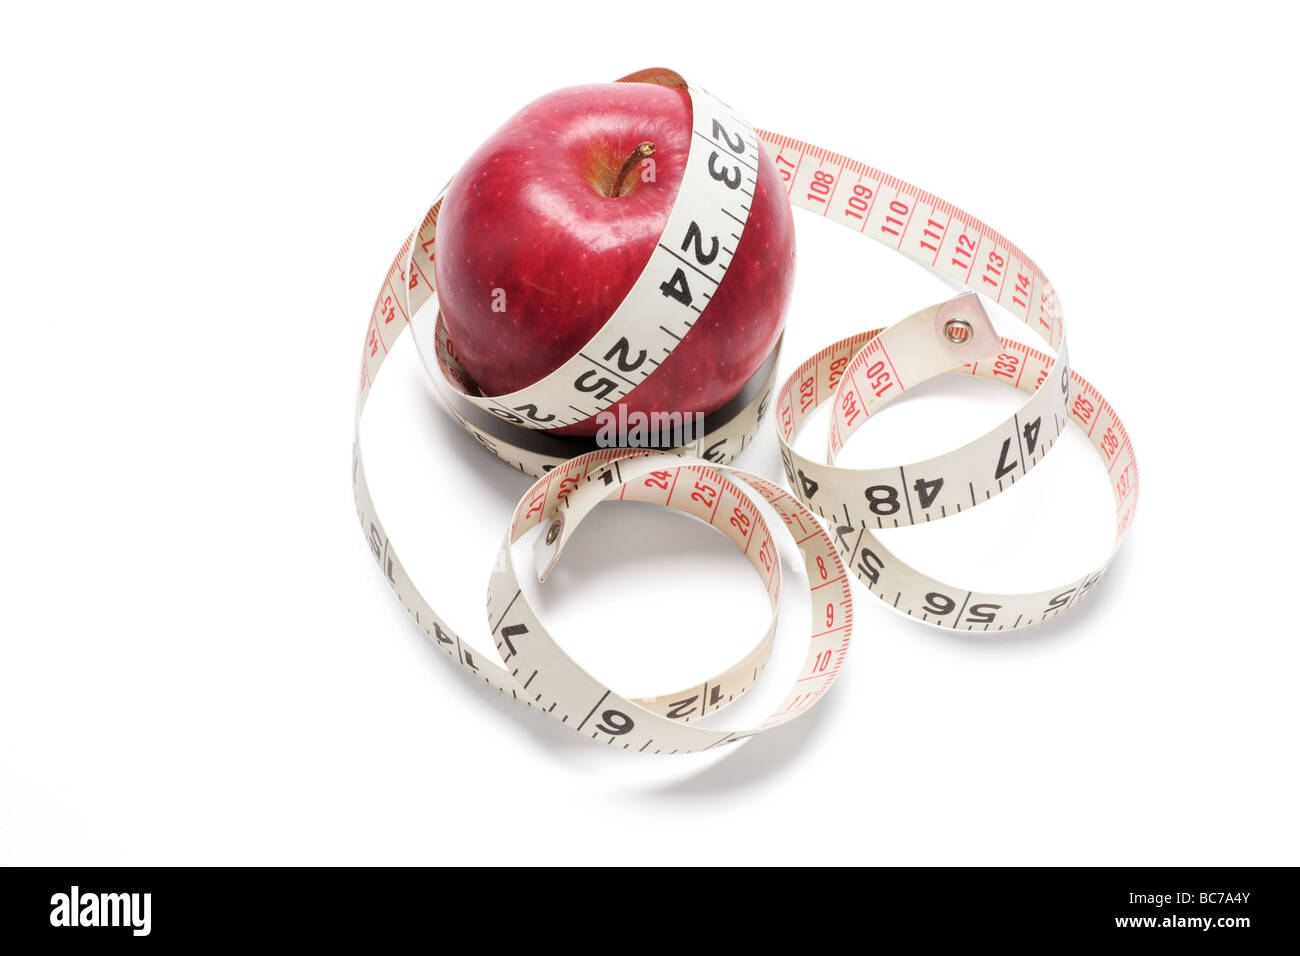 Tape Measure and Red Apple Stock Photo